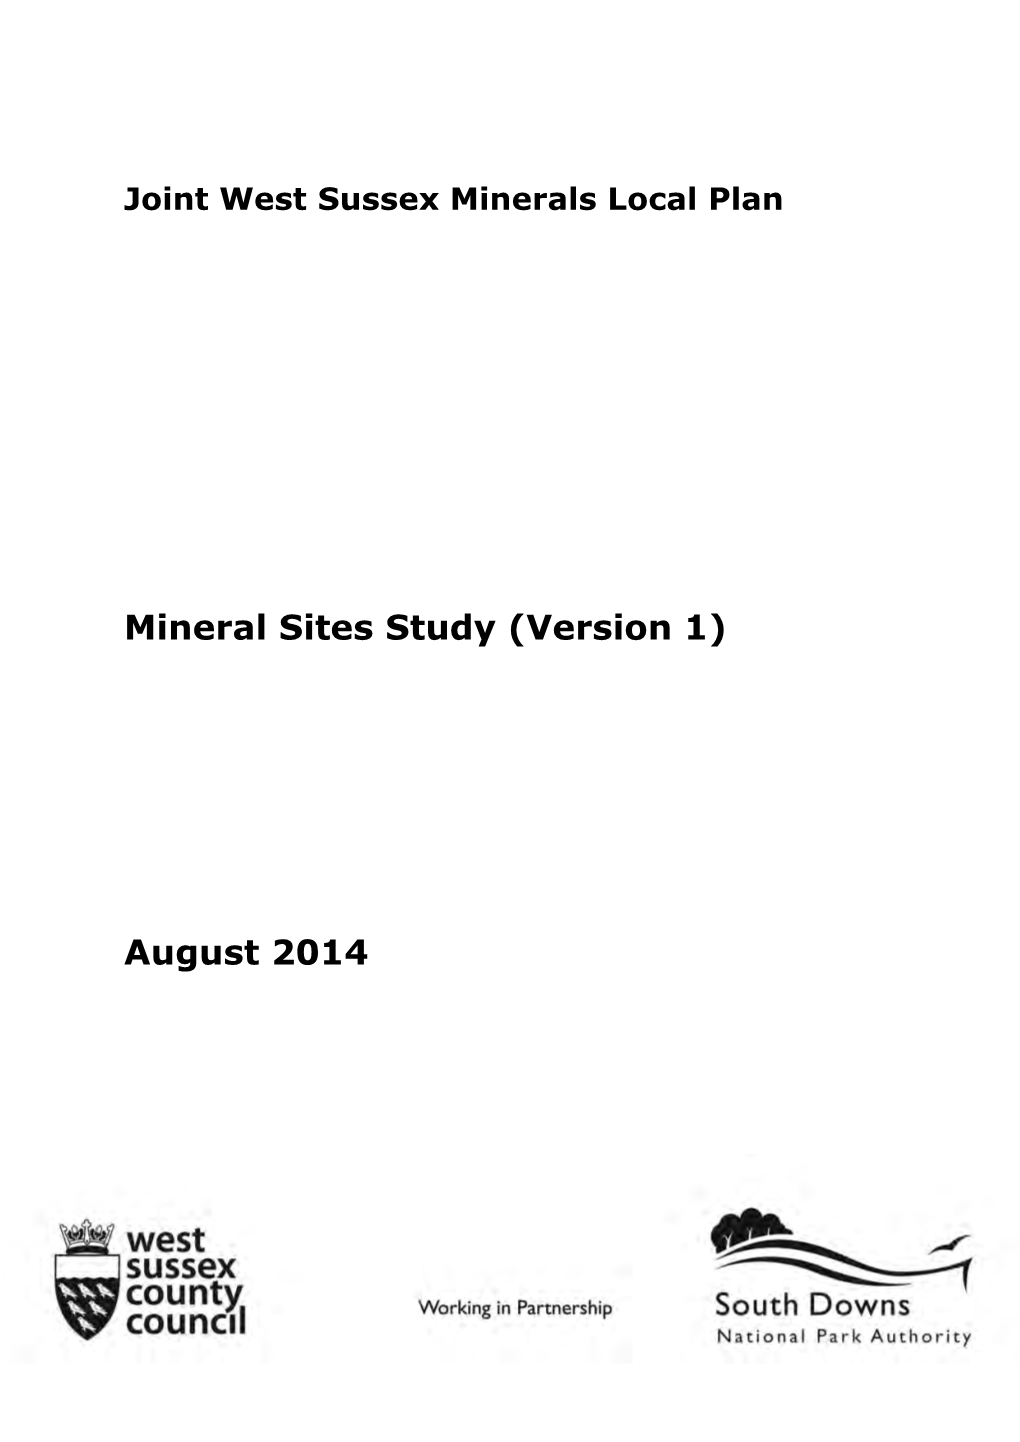 Mineral Sites Study (Version 1)